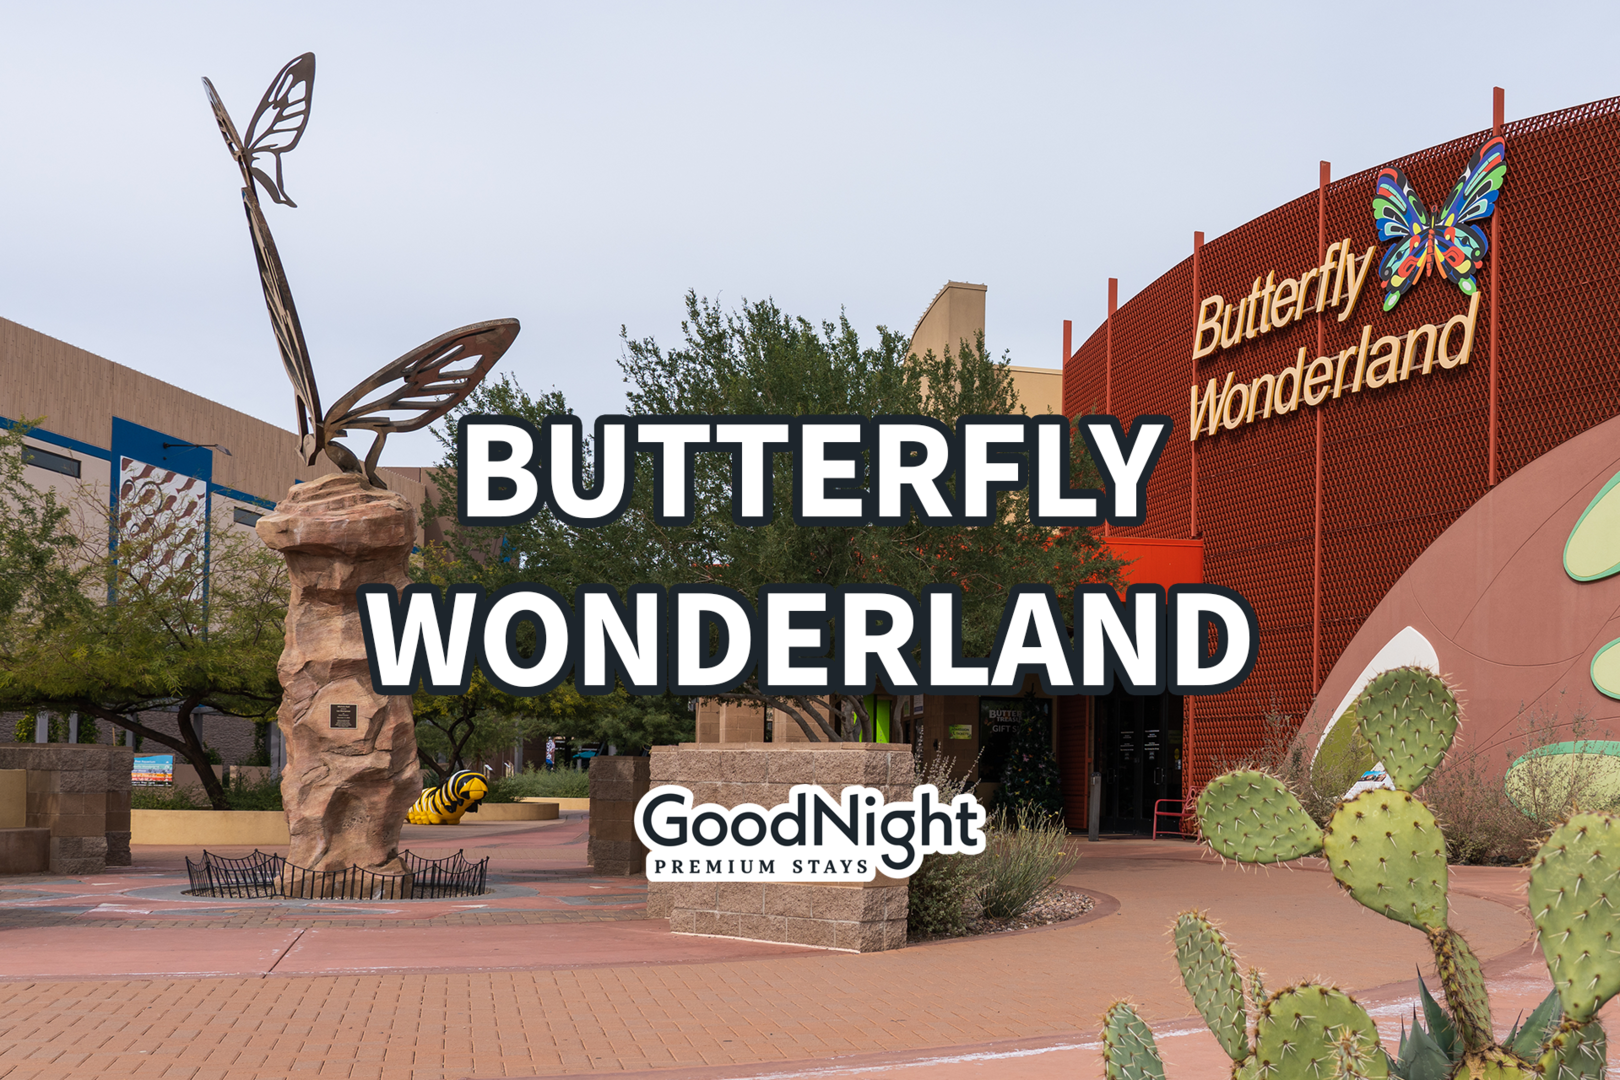 7 mins: Butterfly Wonderland - Largest Butterfly Conservatory in America